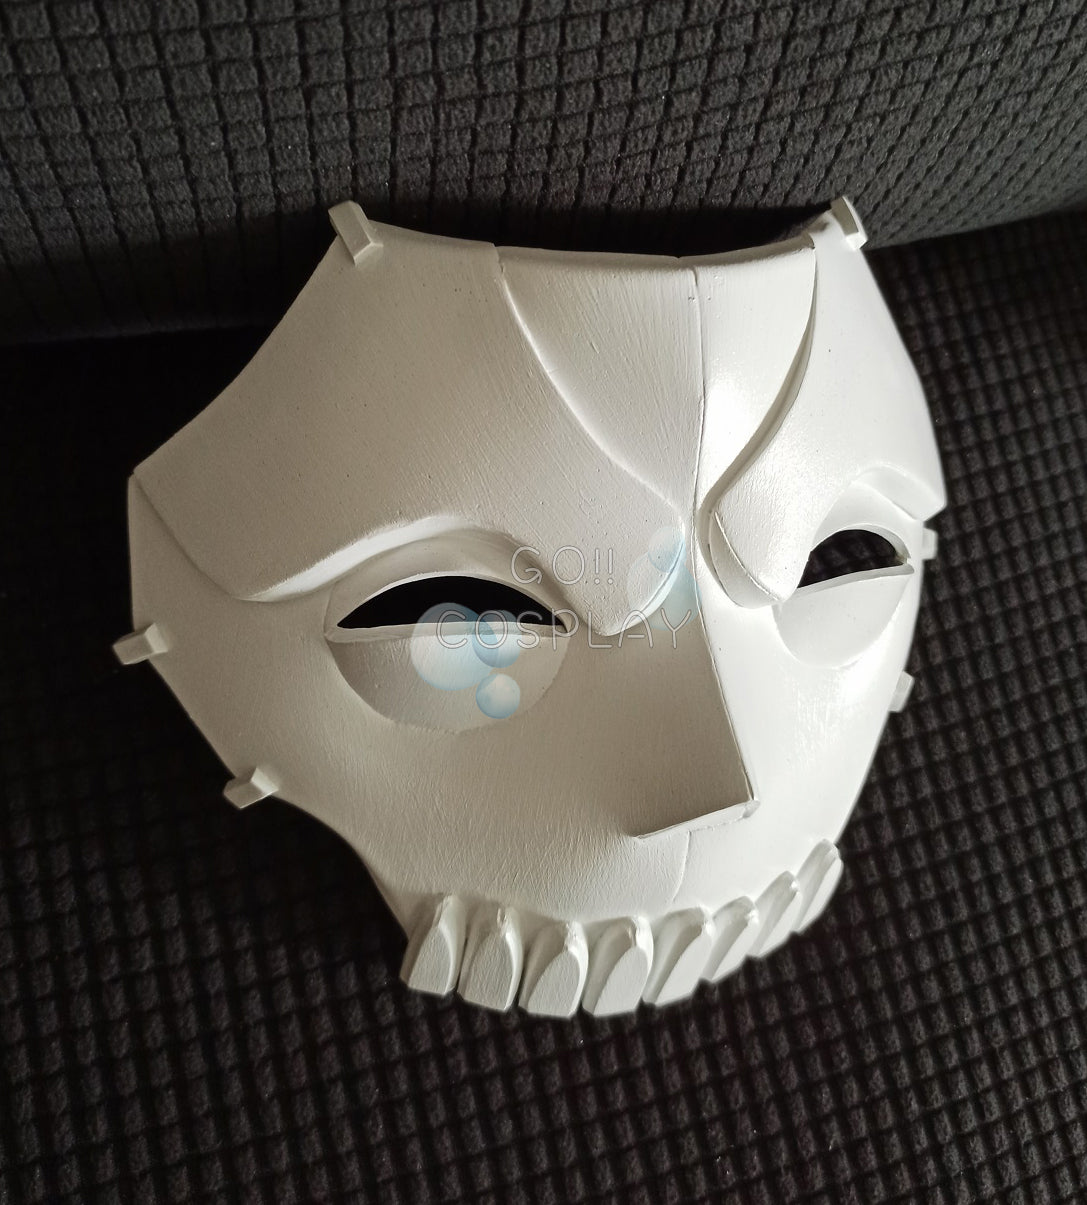 Hassan Assassin Cosplay Mask for Sale